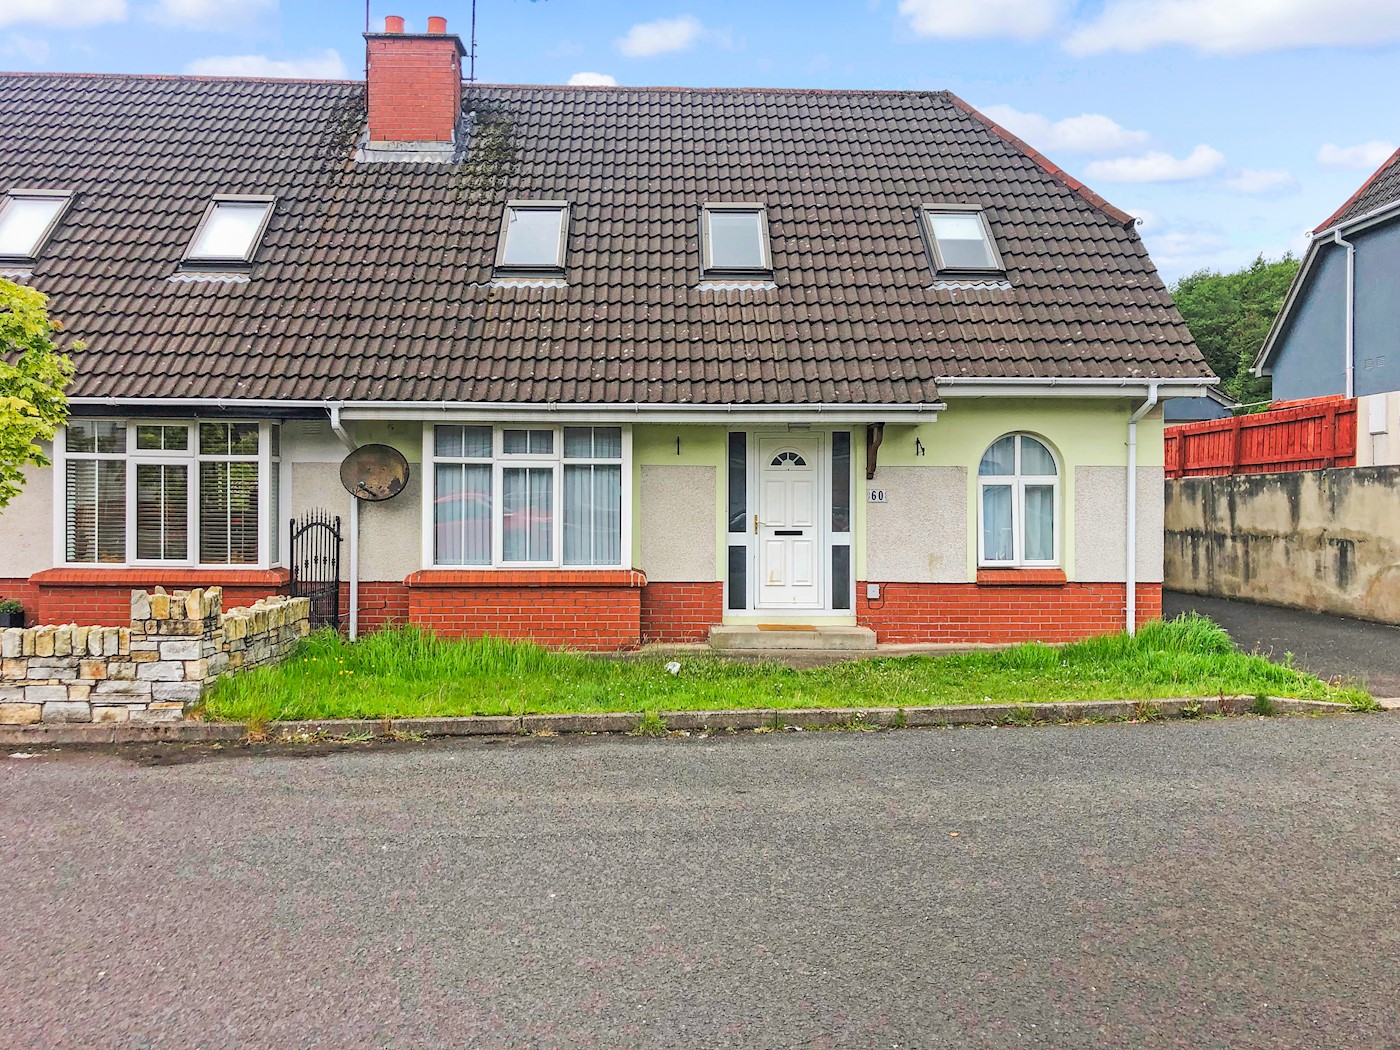 60 College Park, Letterkenny, Co. Donegal, F92 C6F9 1/8